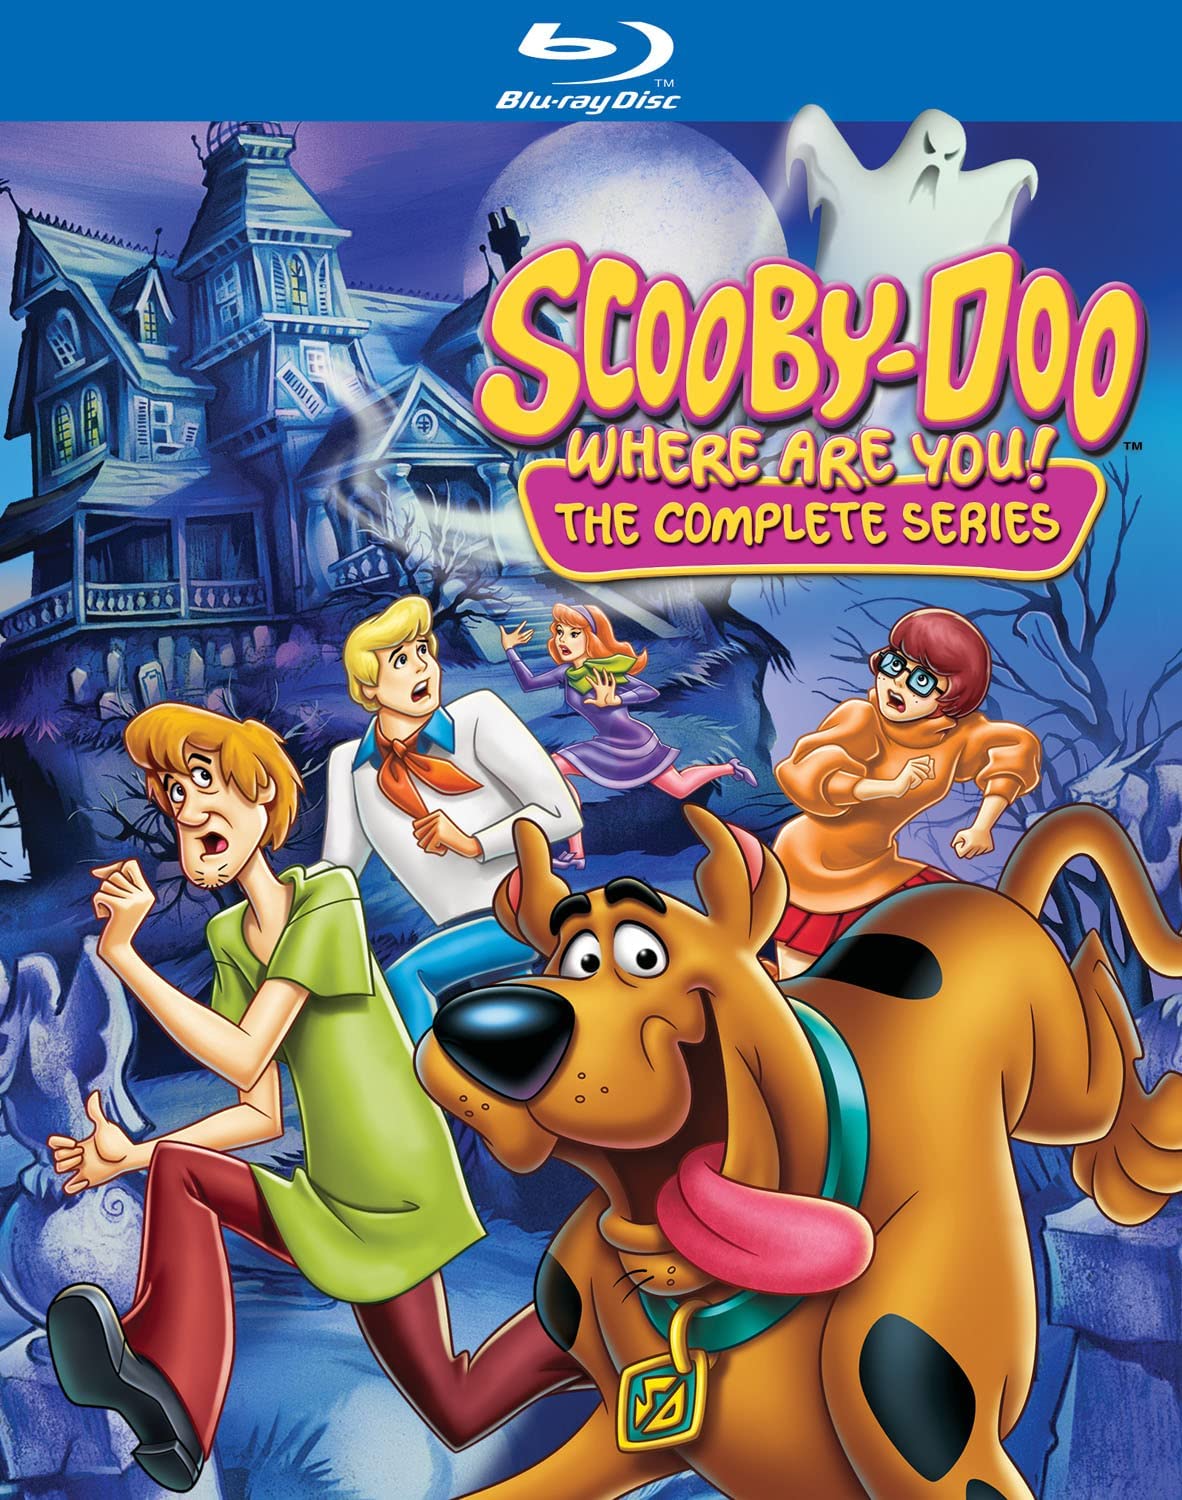 scooby doo where are you dont fool with a phantom